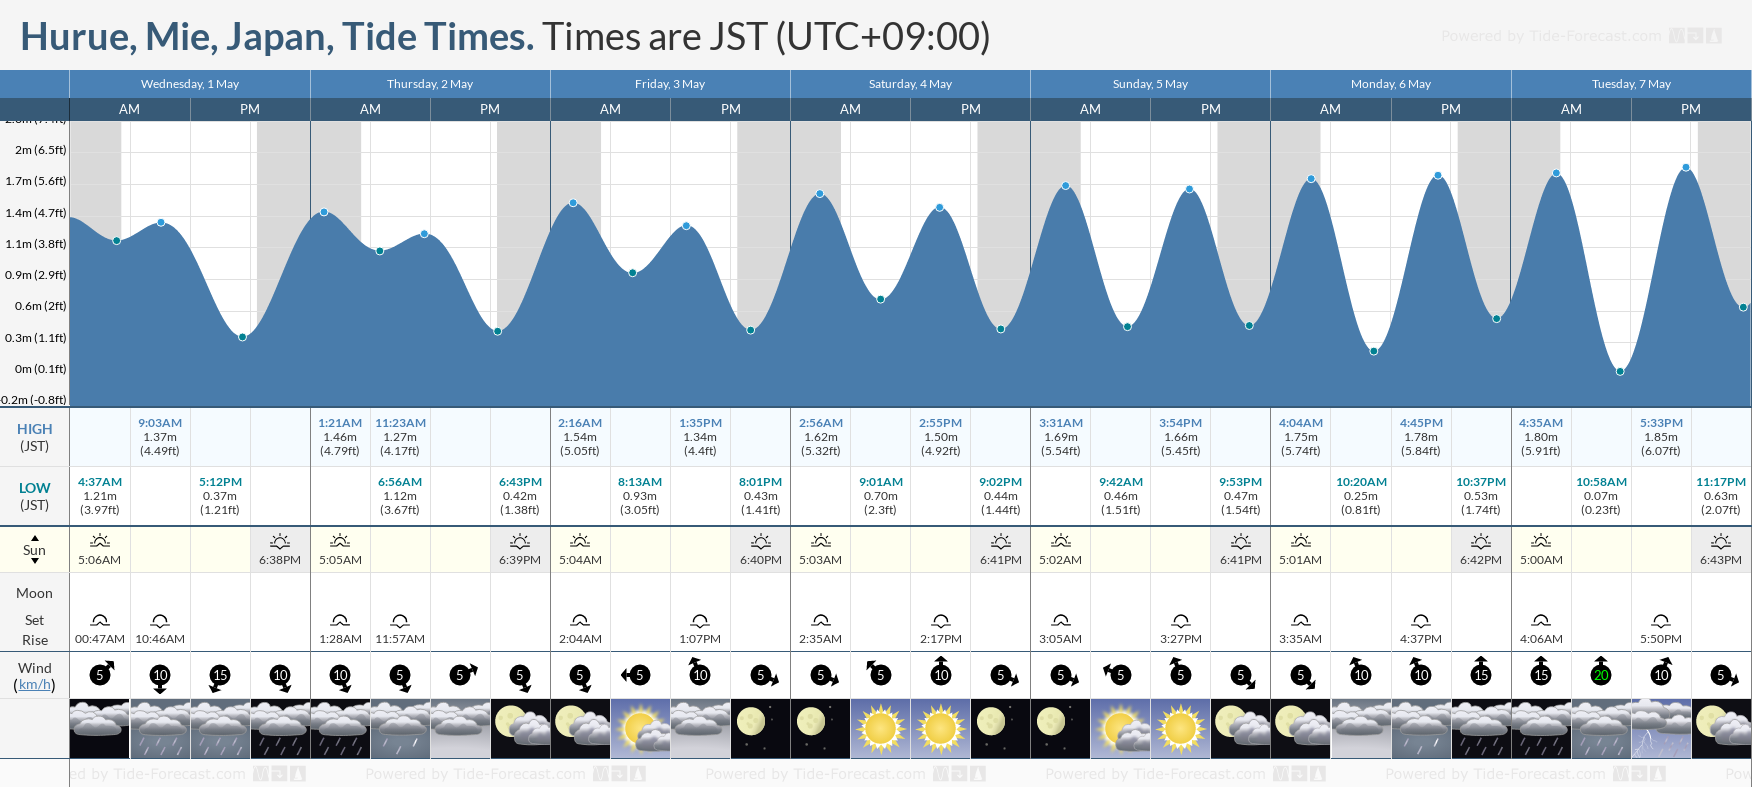 Hurue, Mie, Japan Tide Chart including high and low tide tide times for the next 7 days